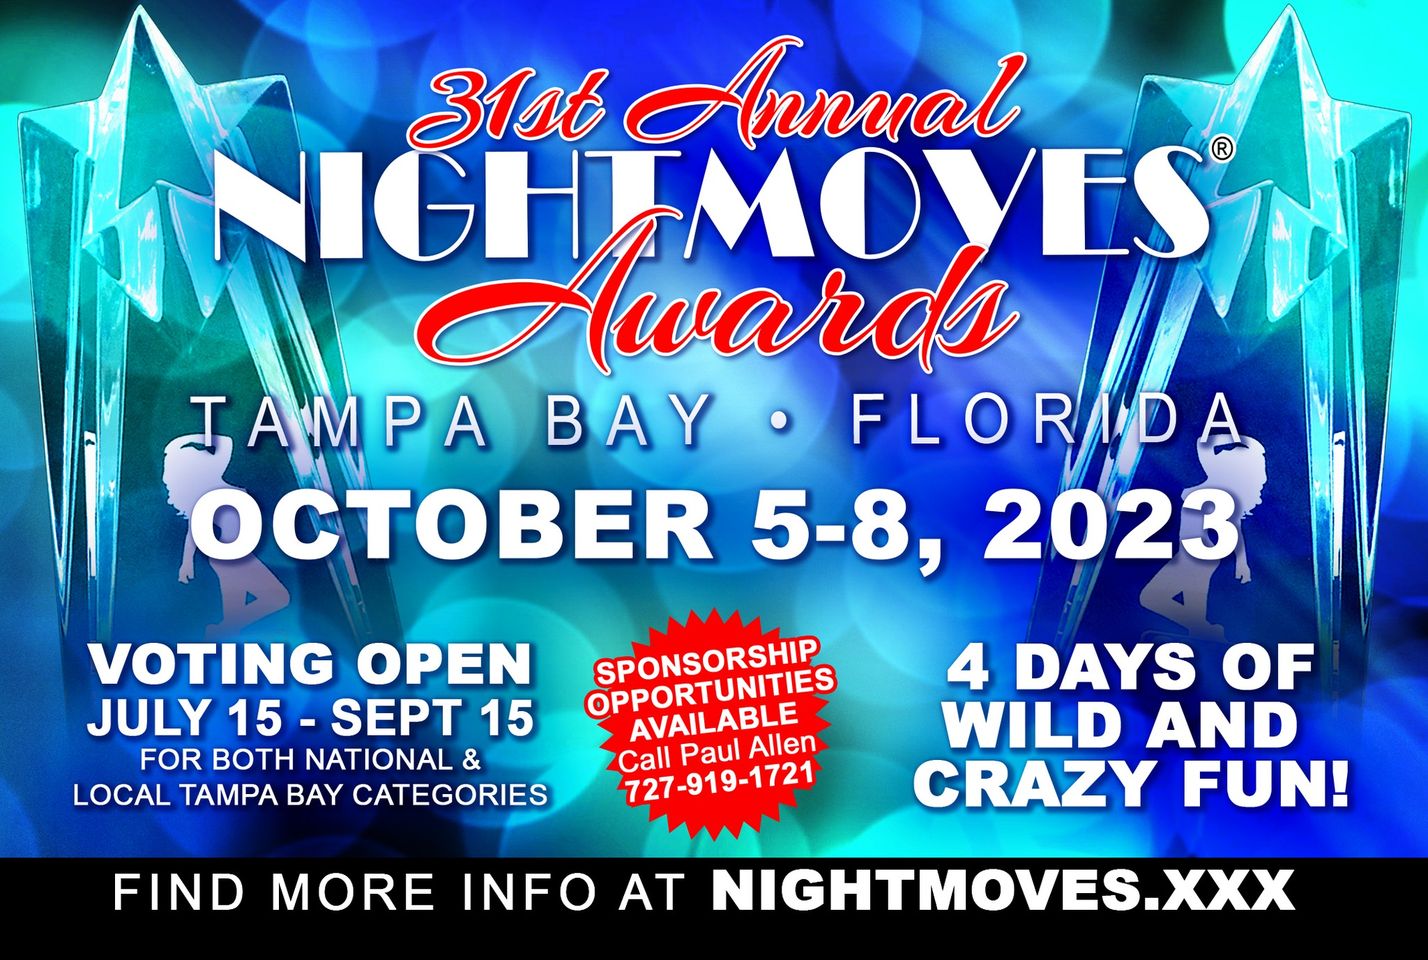 The Voting for the NightMoves Awards is Open